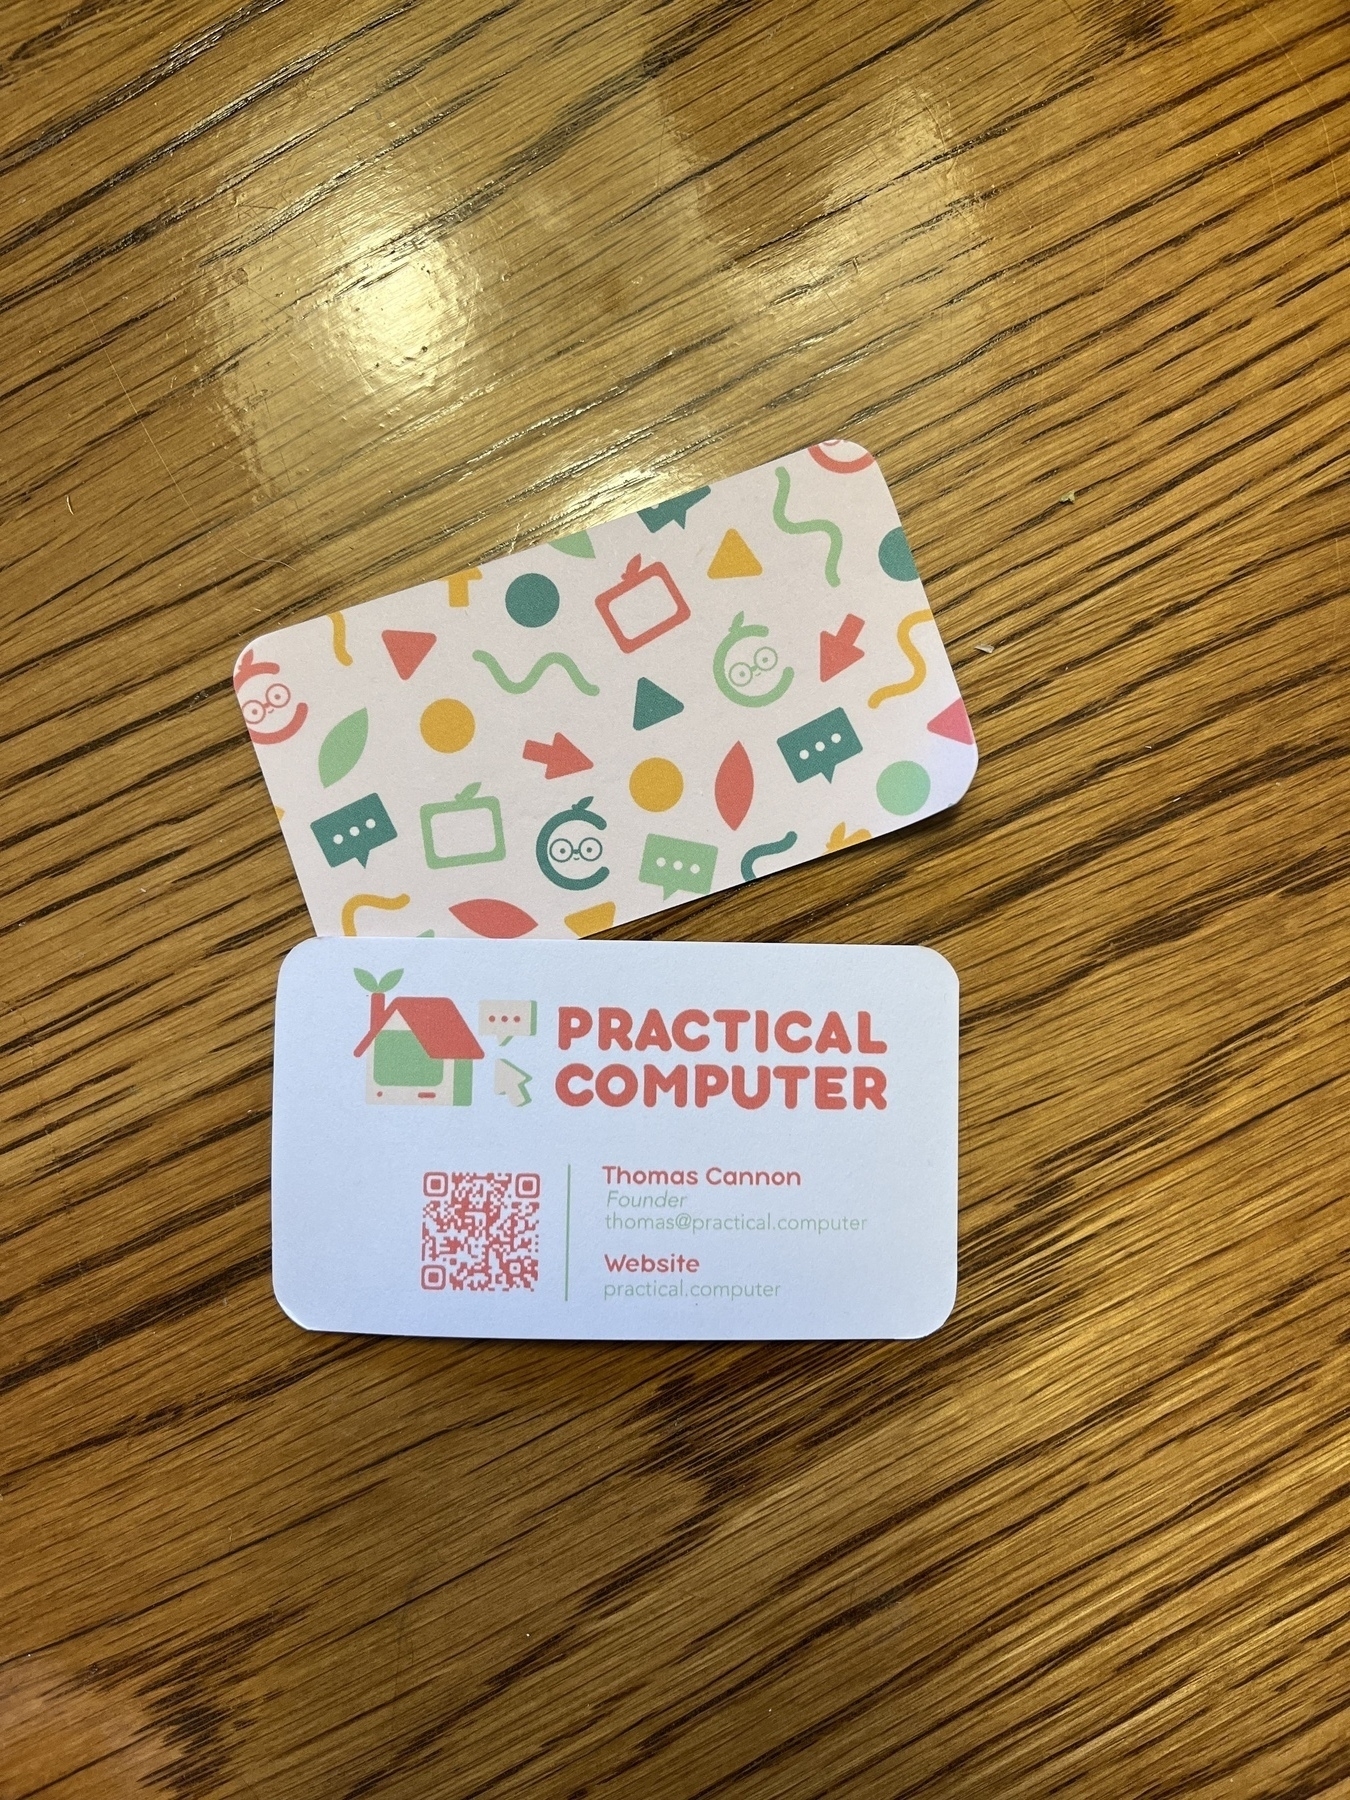 A photo of my business card, front & back, which says the name of my business (Practical Computer), my contact information, and has a QR code